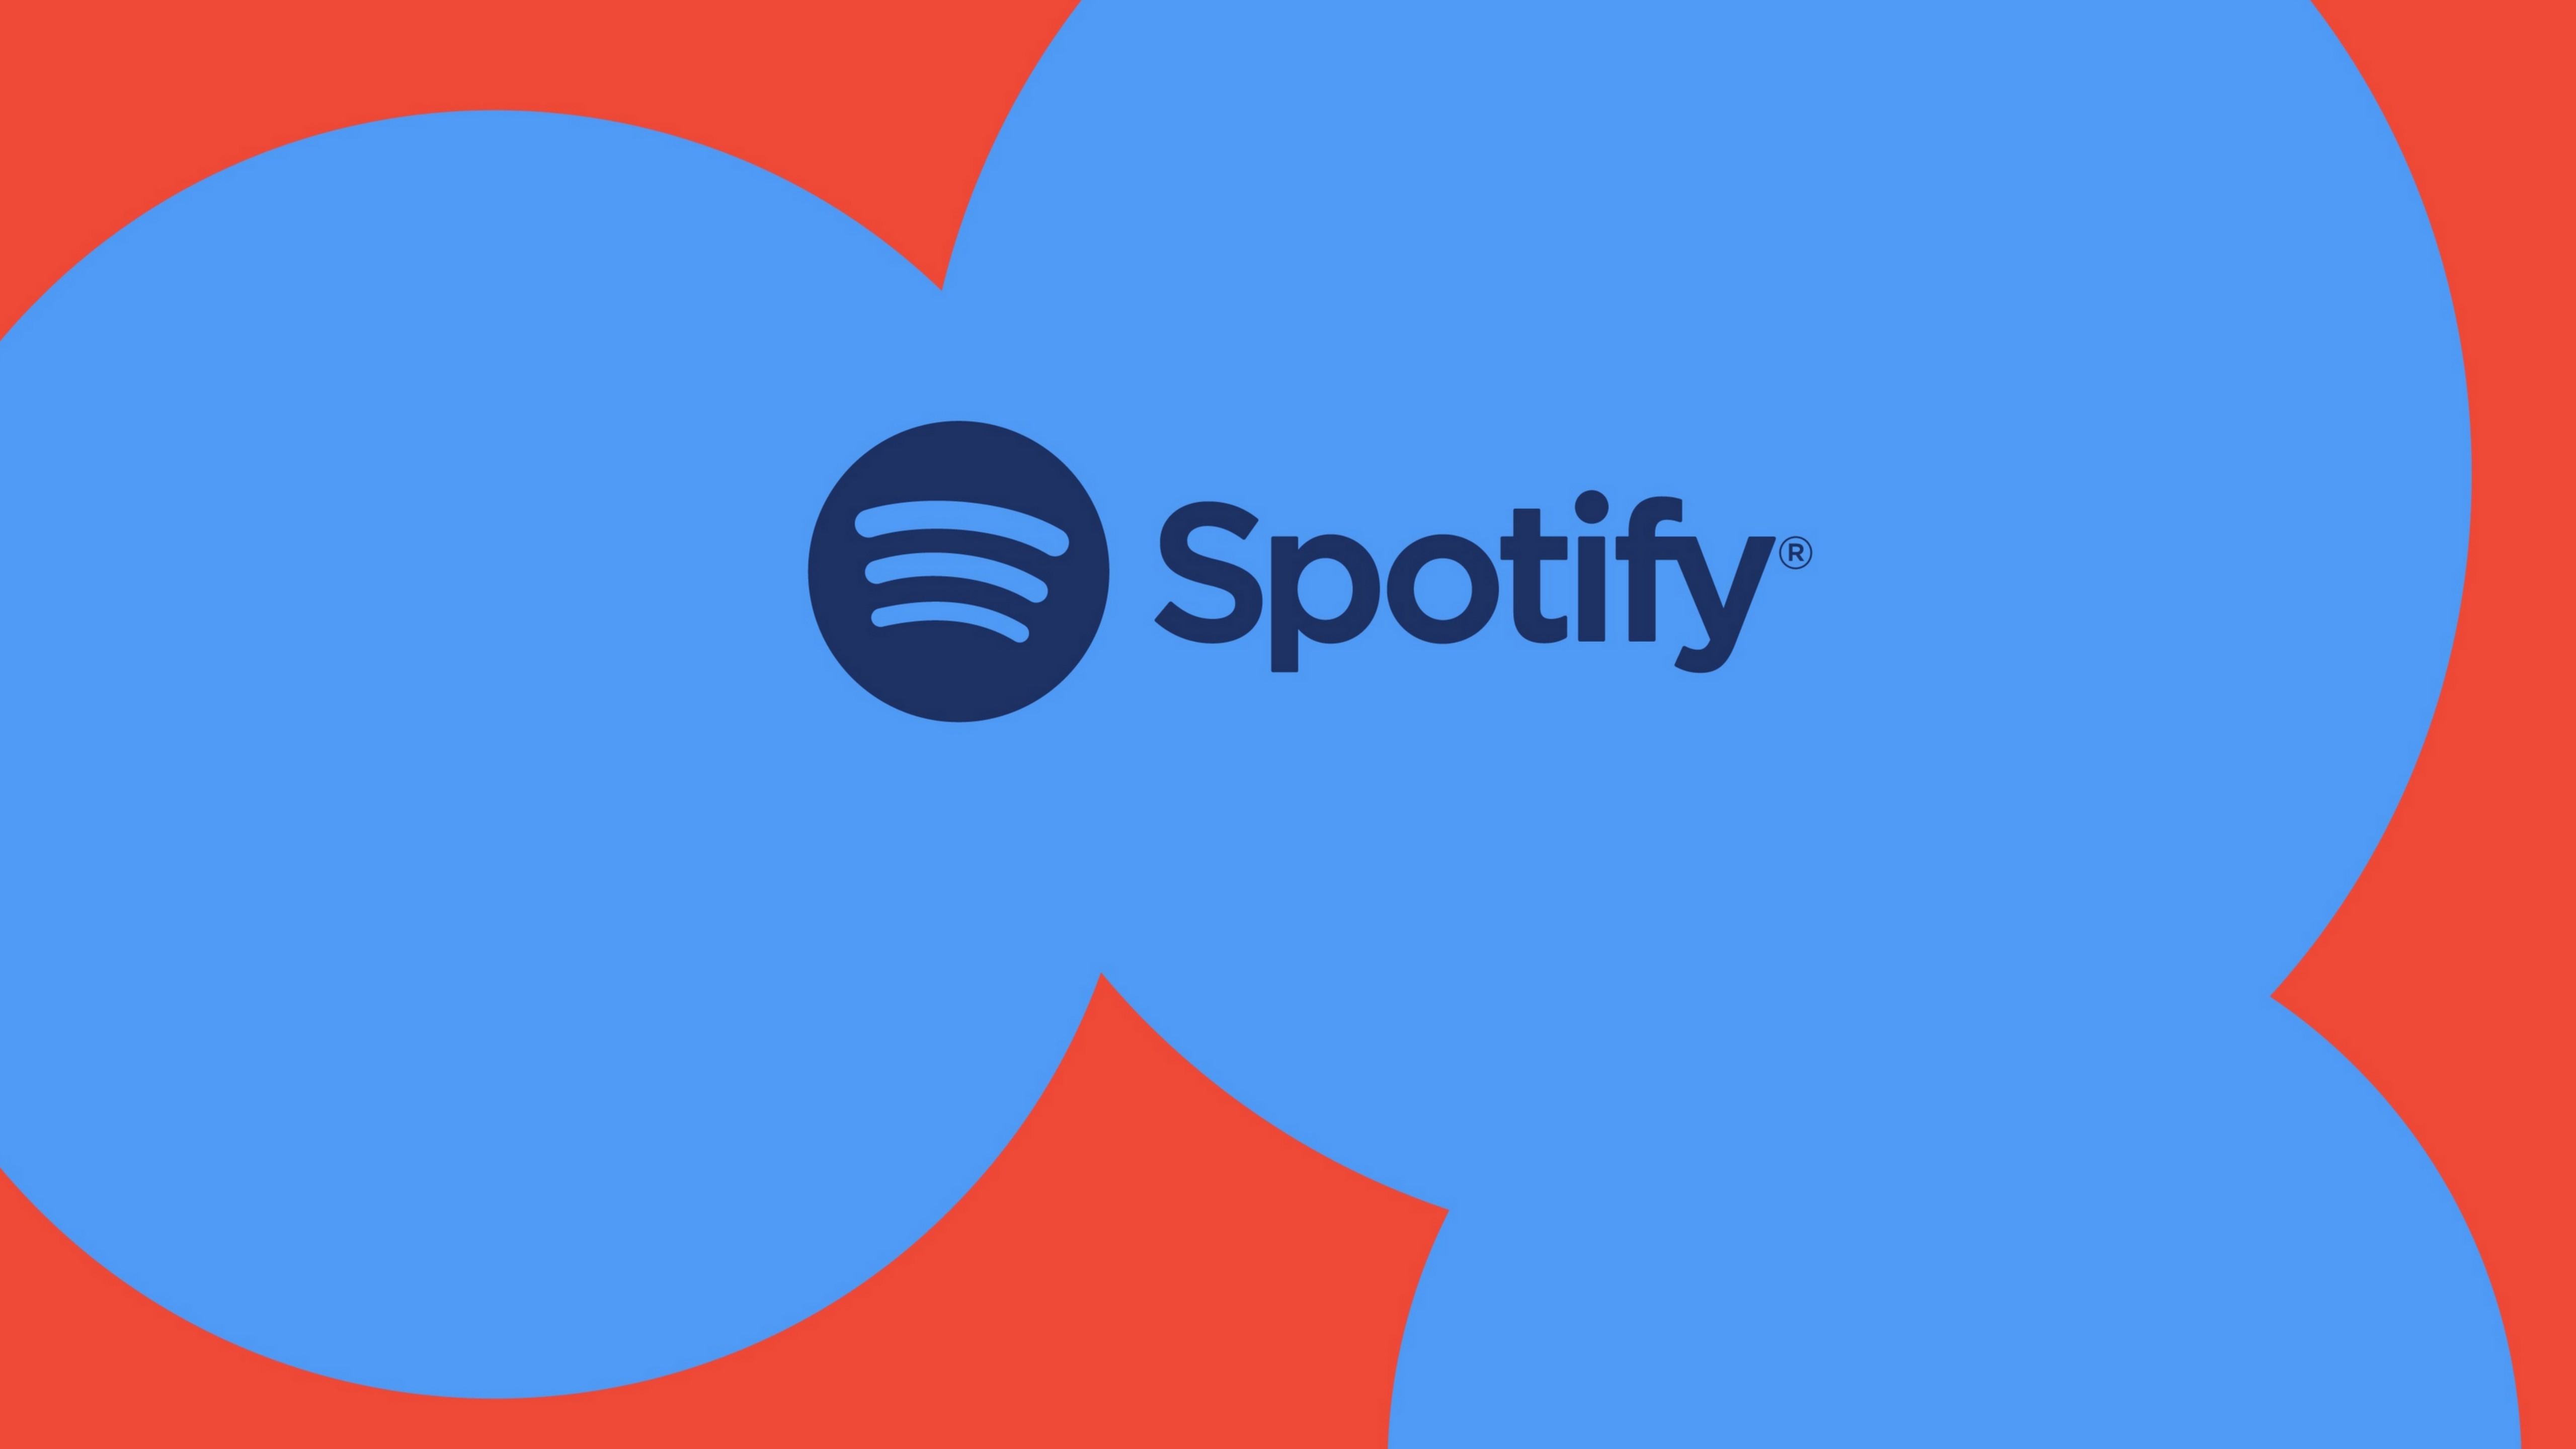 Spotify Premium: How to Add Family to Your Account - CNET